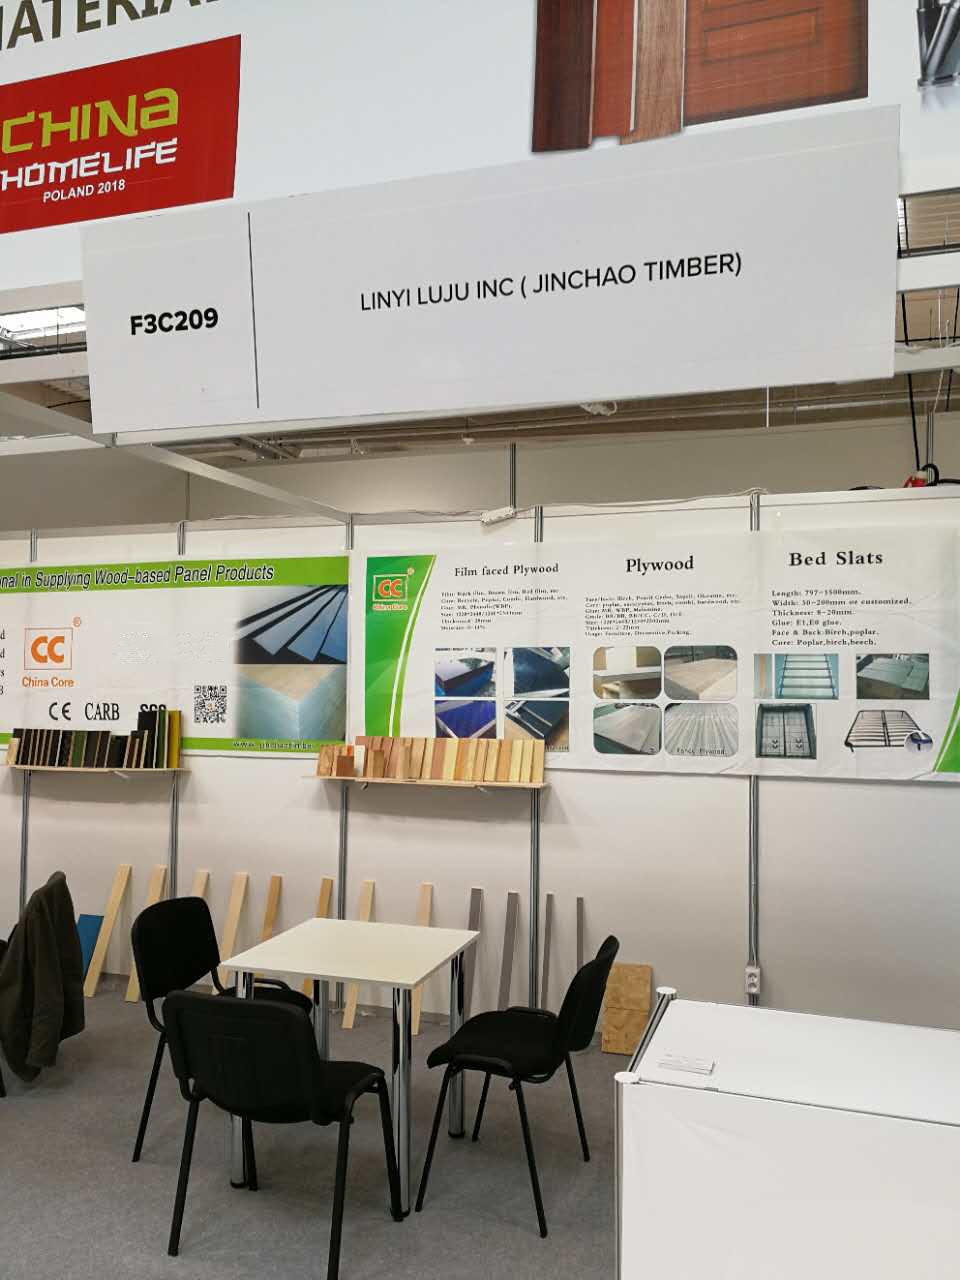 Attend the Warsaw International Expocentre EXPO in Poland